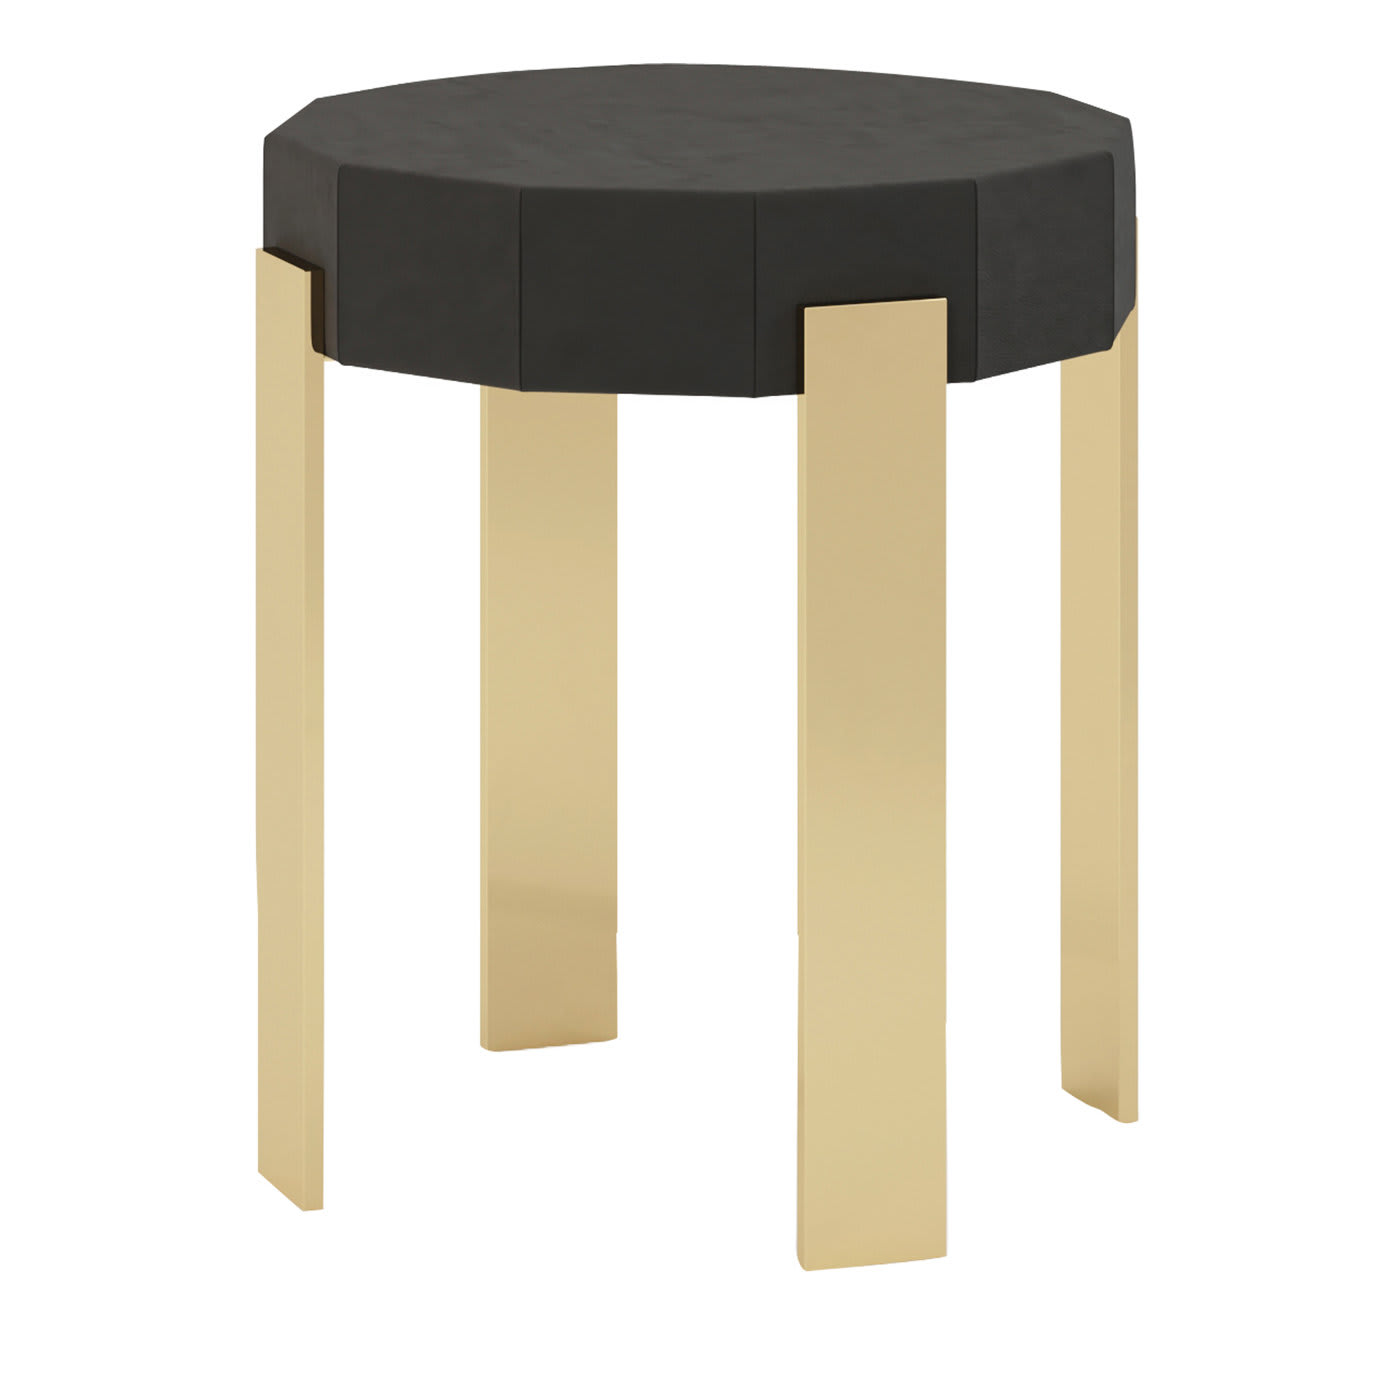 Carthay Side Table by Giannella Ventura - Inedito